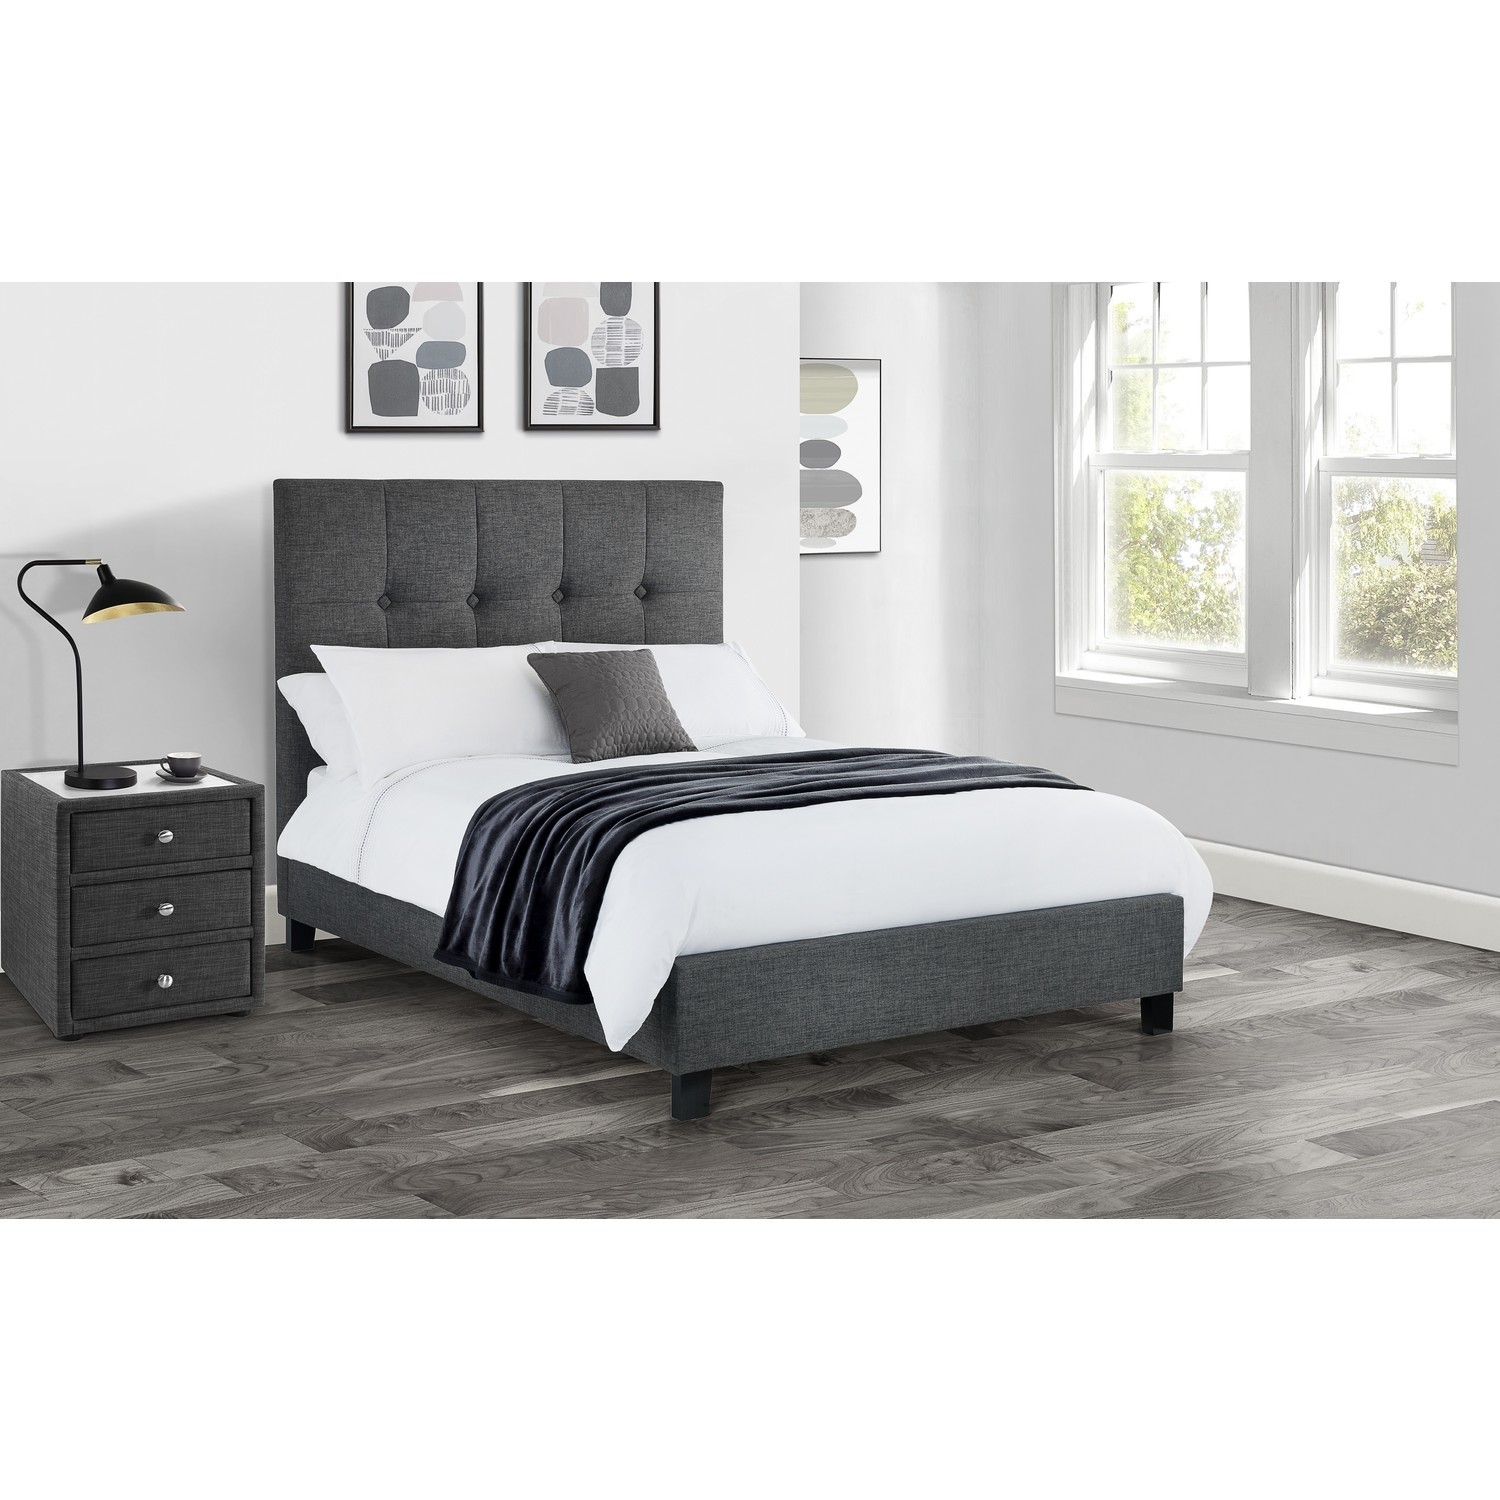 Dark Grey Super King Size Bed Frame, Tall Headboard King Size Bed